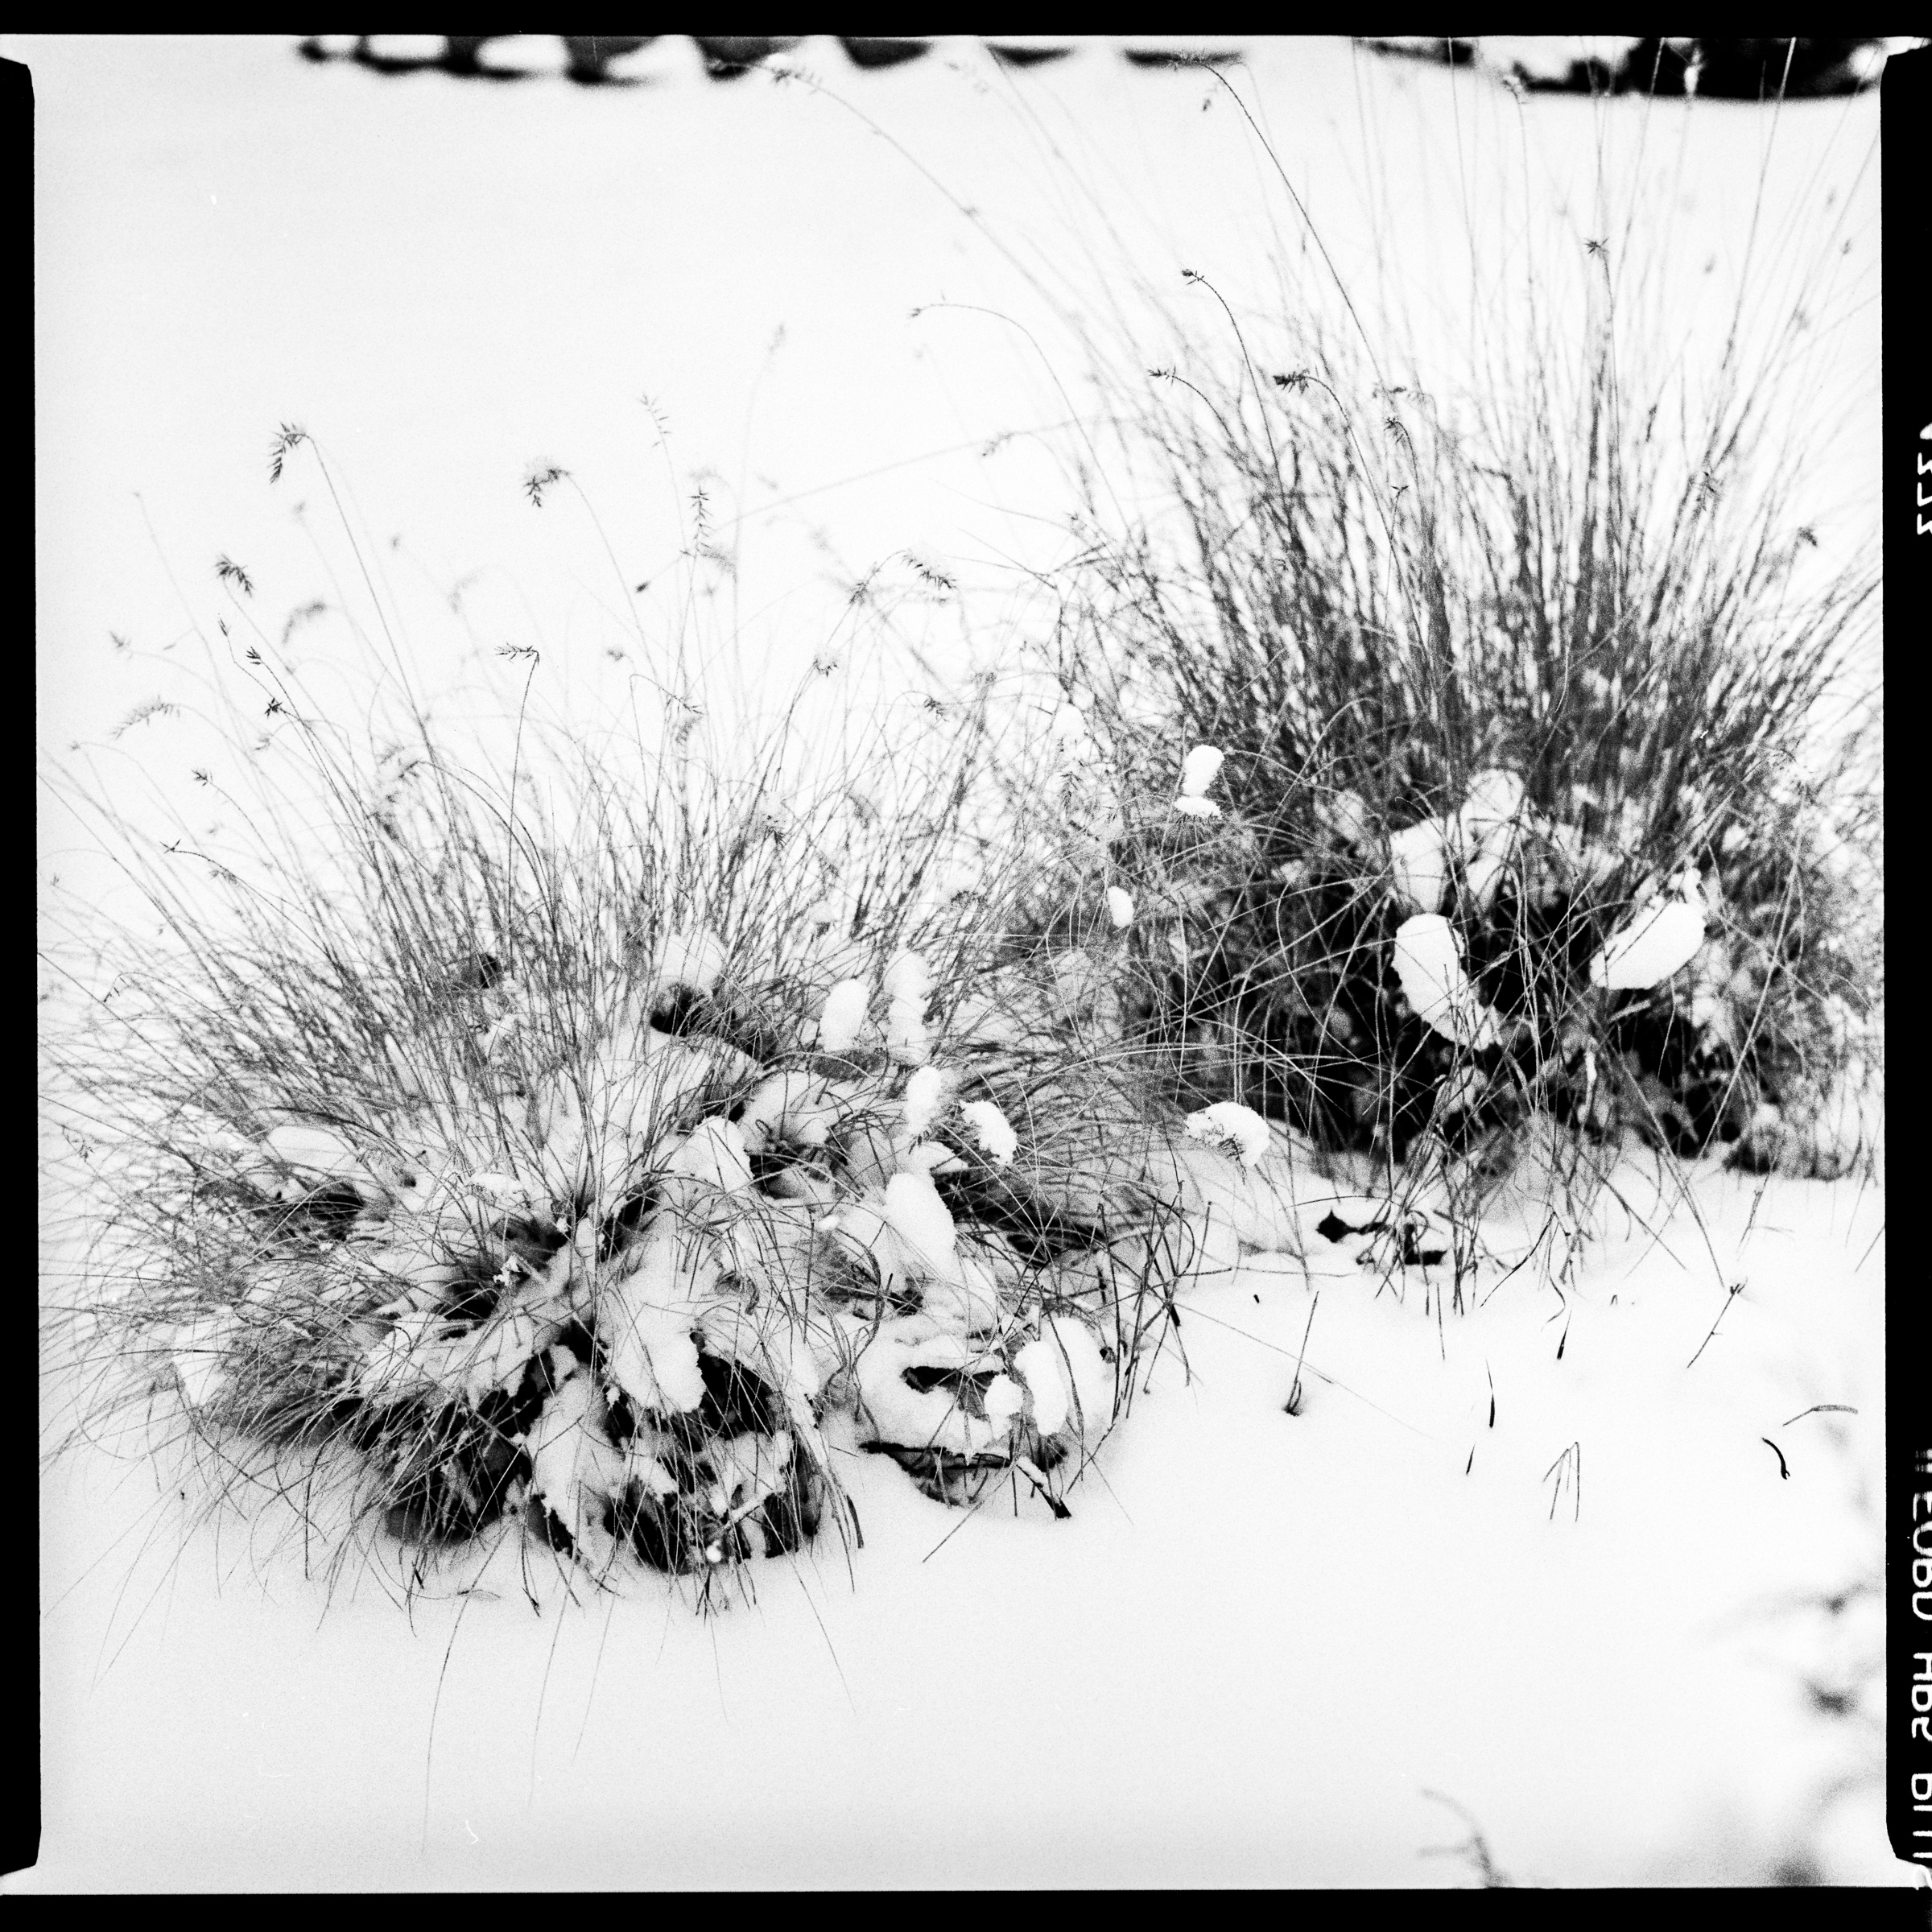 Black and white photo of two clumps of grass in a snowy field